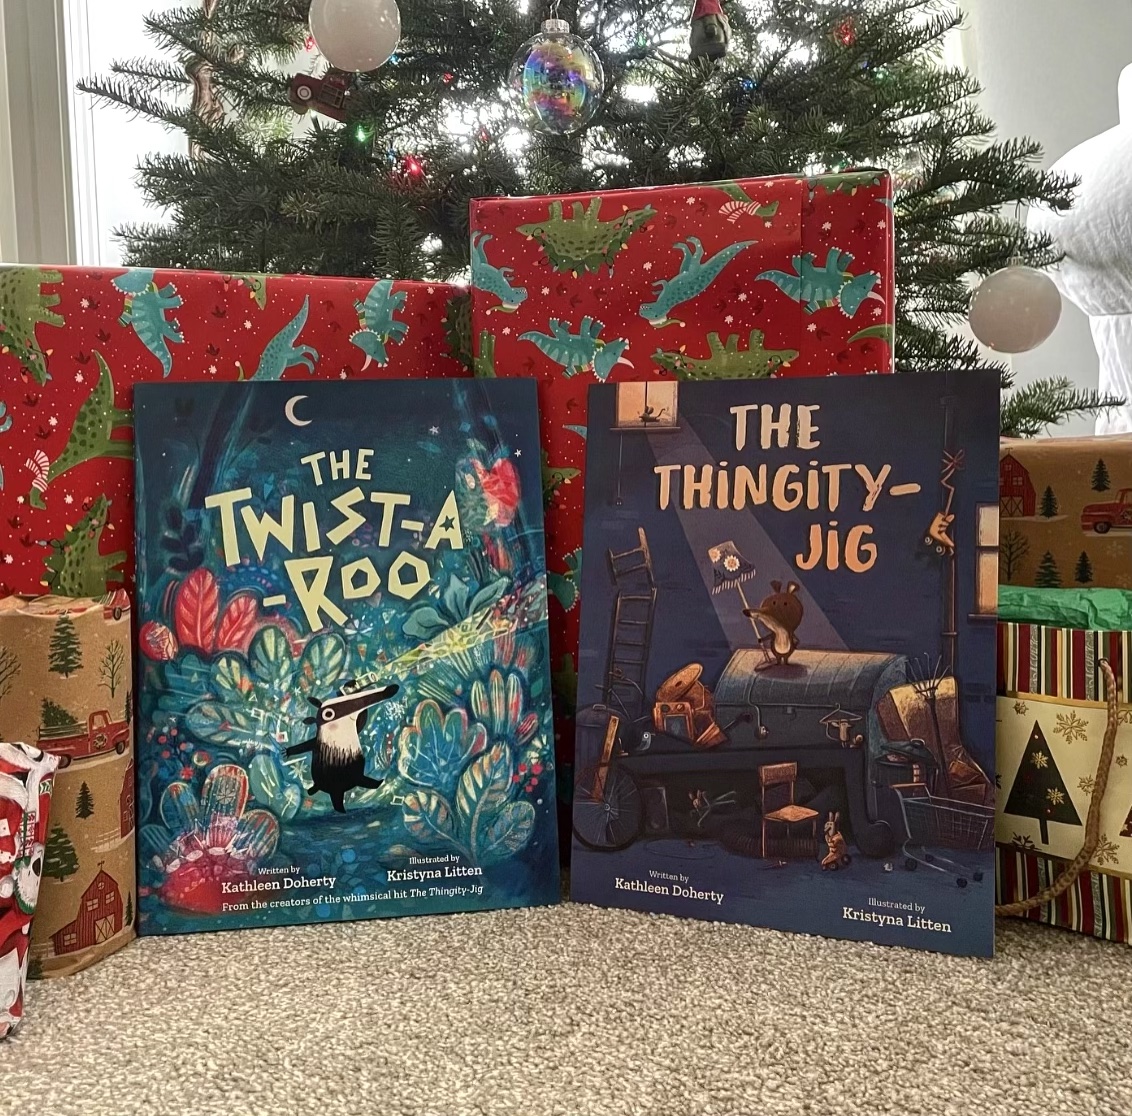 Looking for #picturebooks for the inventor on your list this holiday season? THE TWIST-A-ROO and THE THINGITY-JIG would be right at home in their library! Check out the rest of our holiday gift guide here: ow.ly/5Czq50QiVGy @Doherty60 @KristynaLitten #kidlit